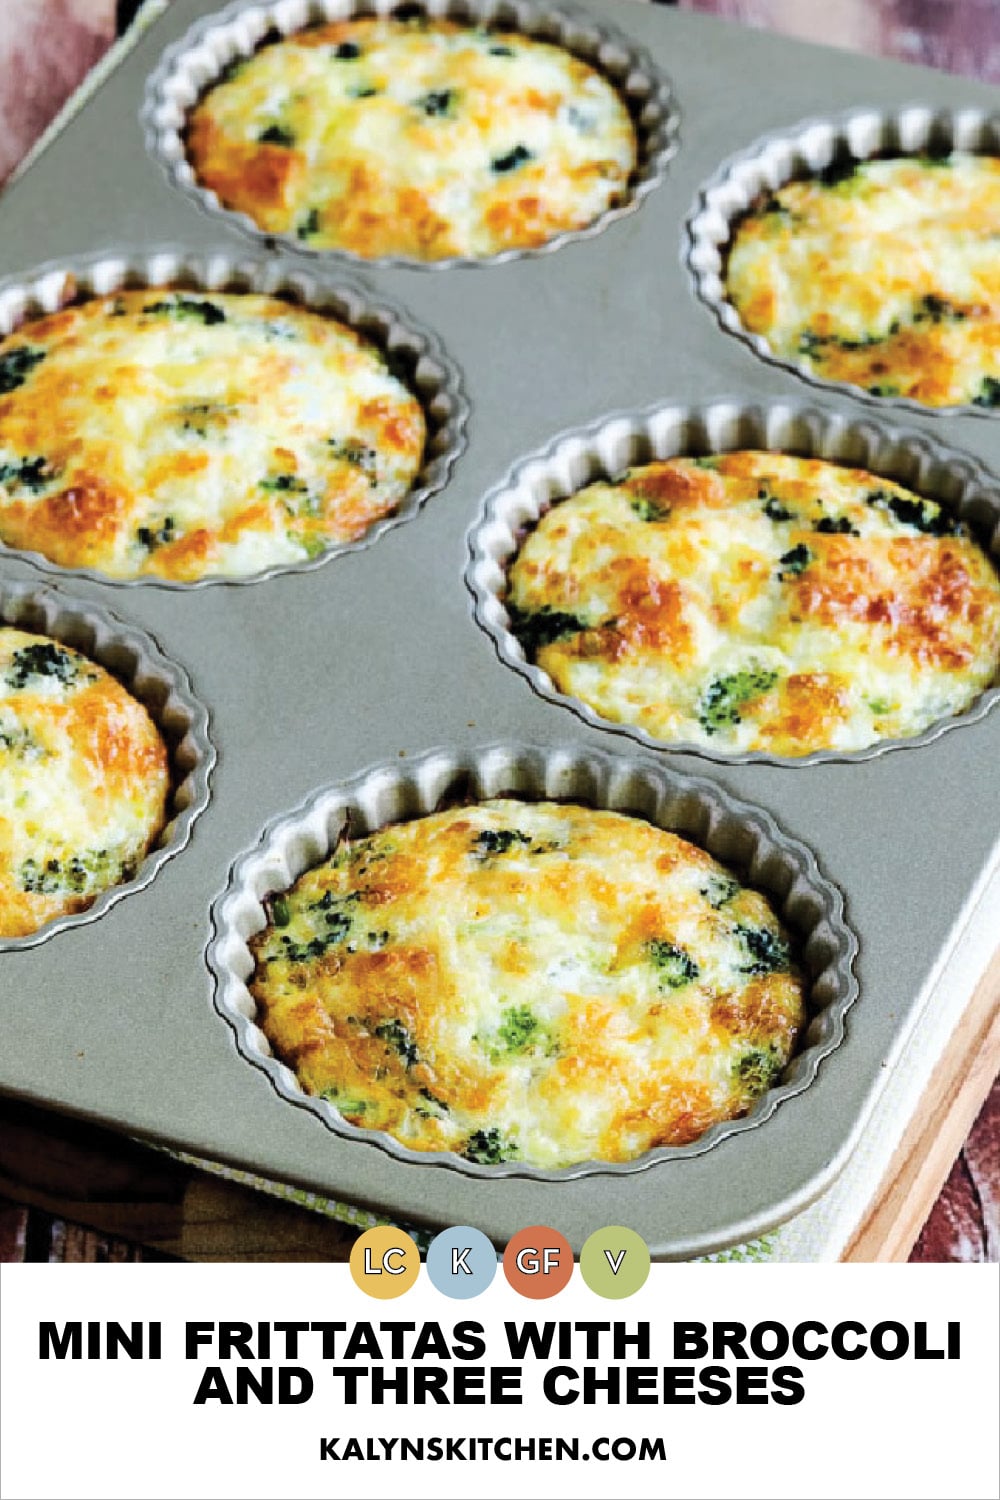 Pinterest image of Mini Frittatas with Broccoli and Three Cheeses